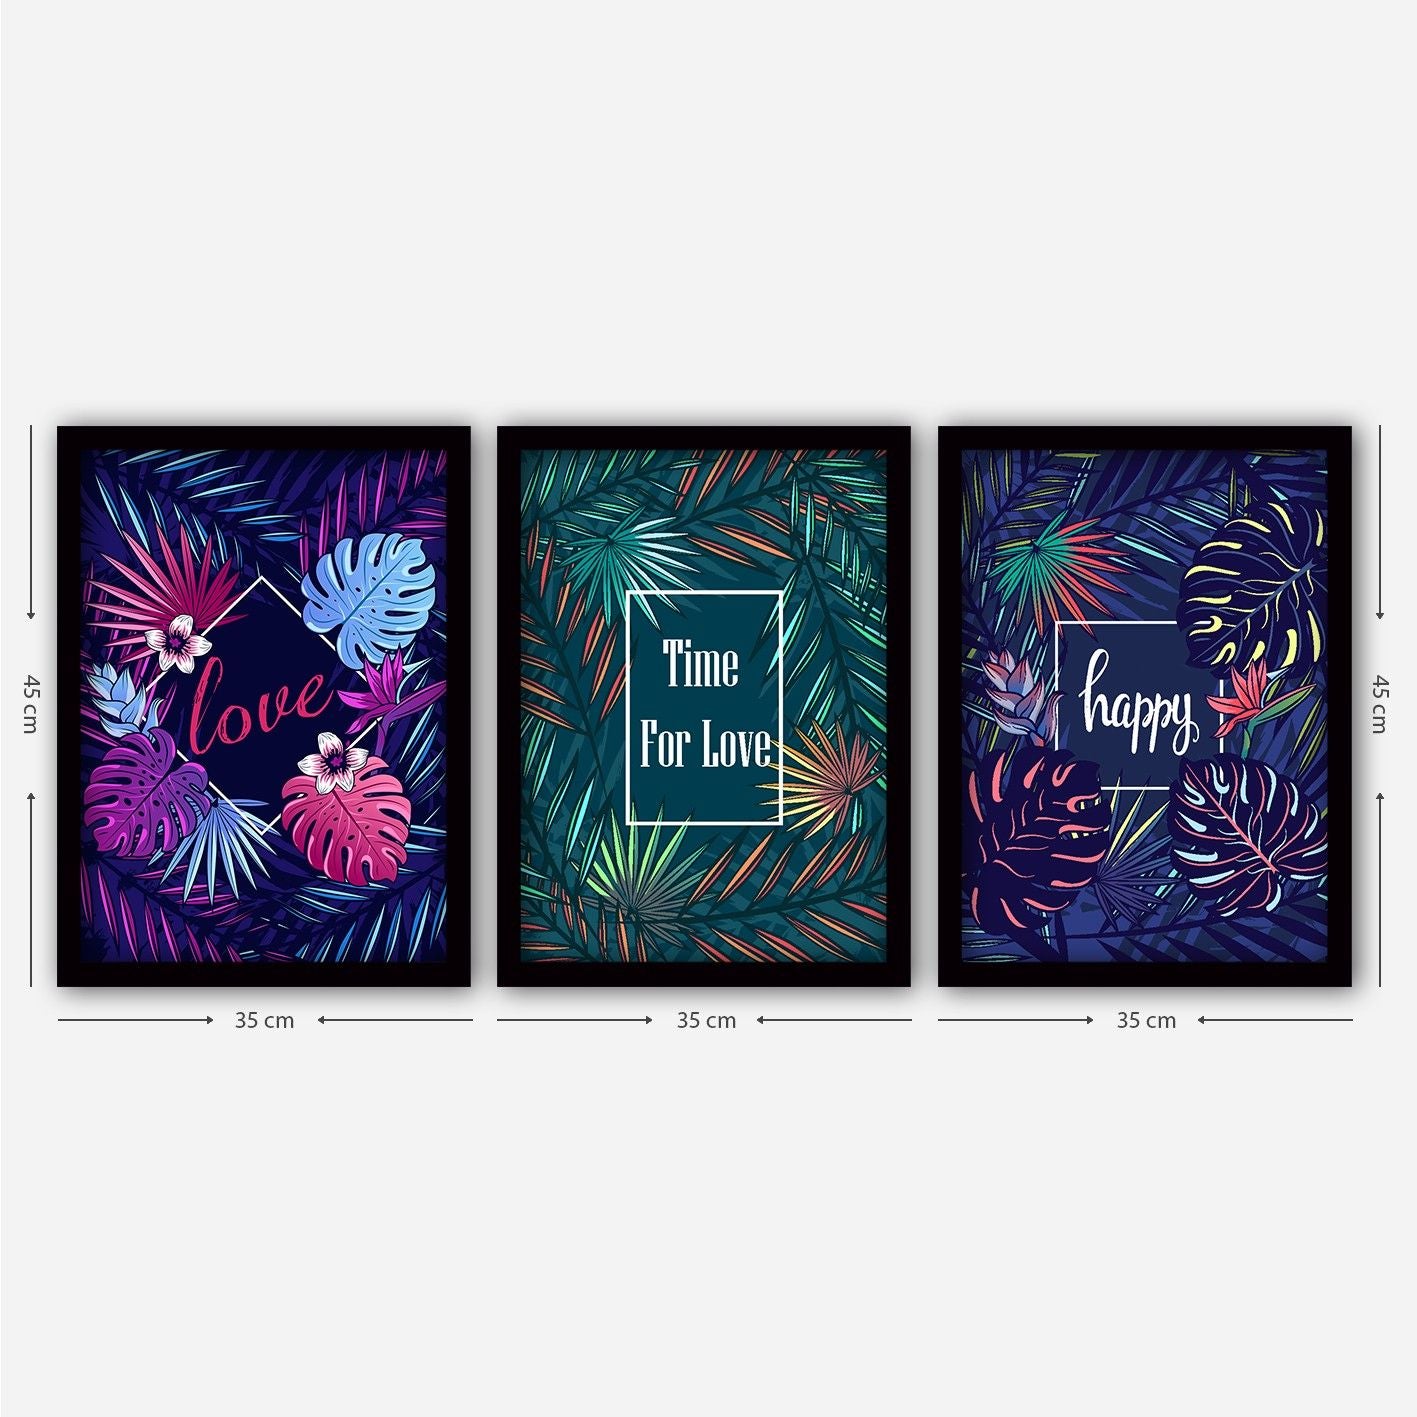 3SC127 - Decorative Framed Painting (3 Pieces)